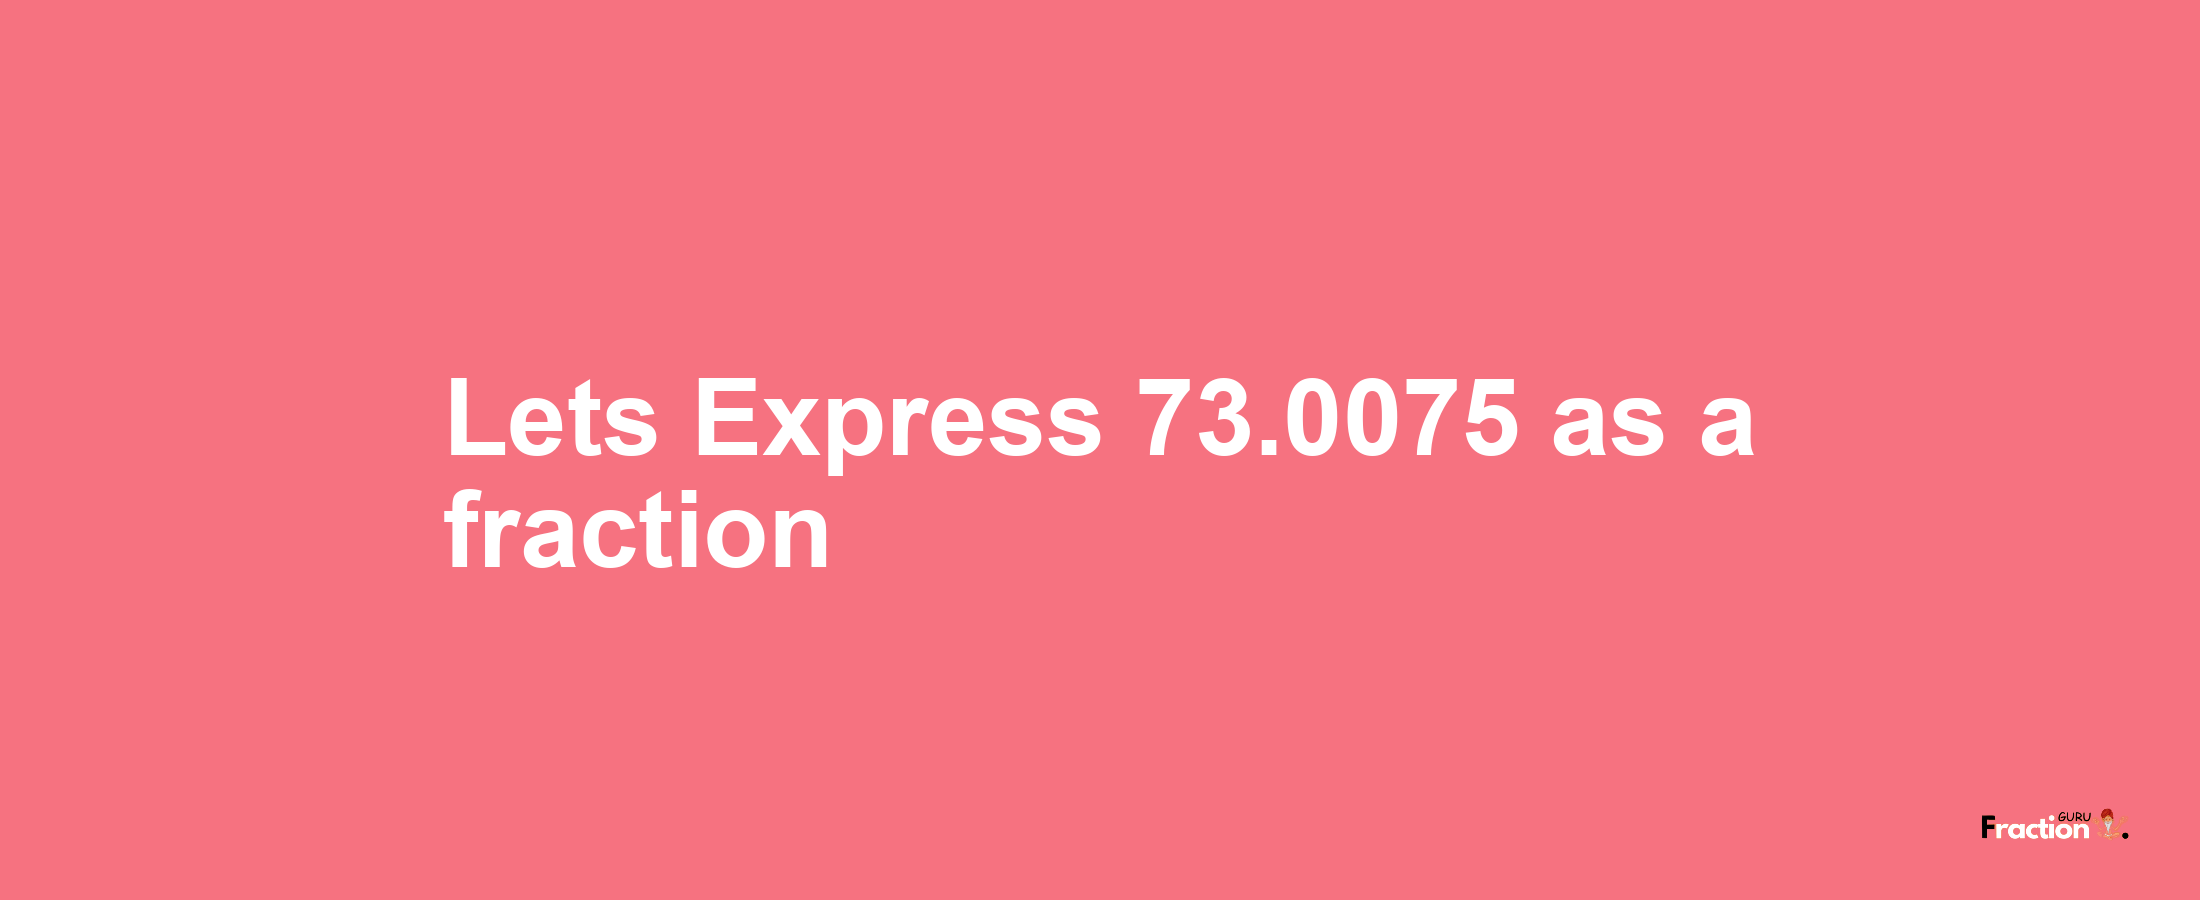 Lets Express 73.0075 as afraction